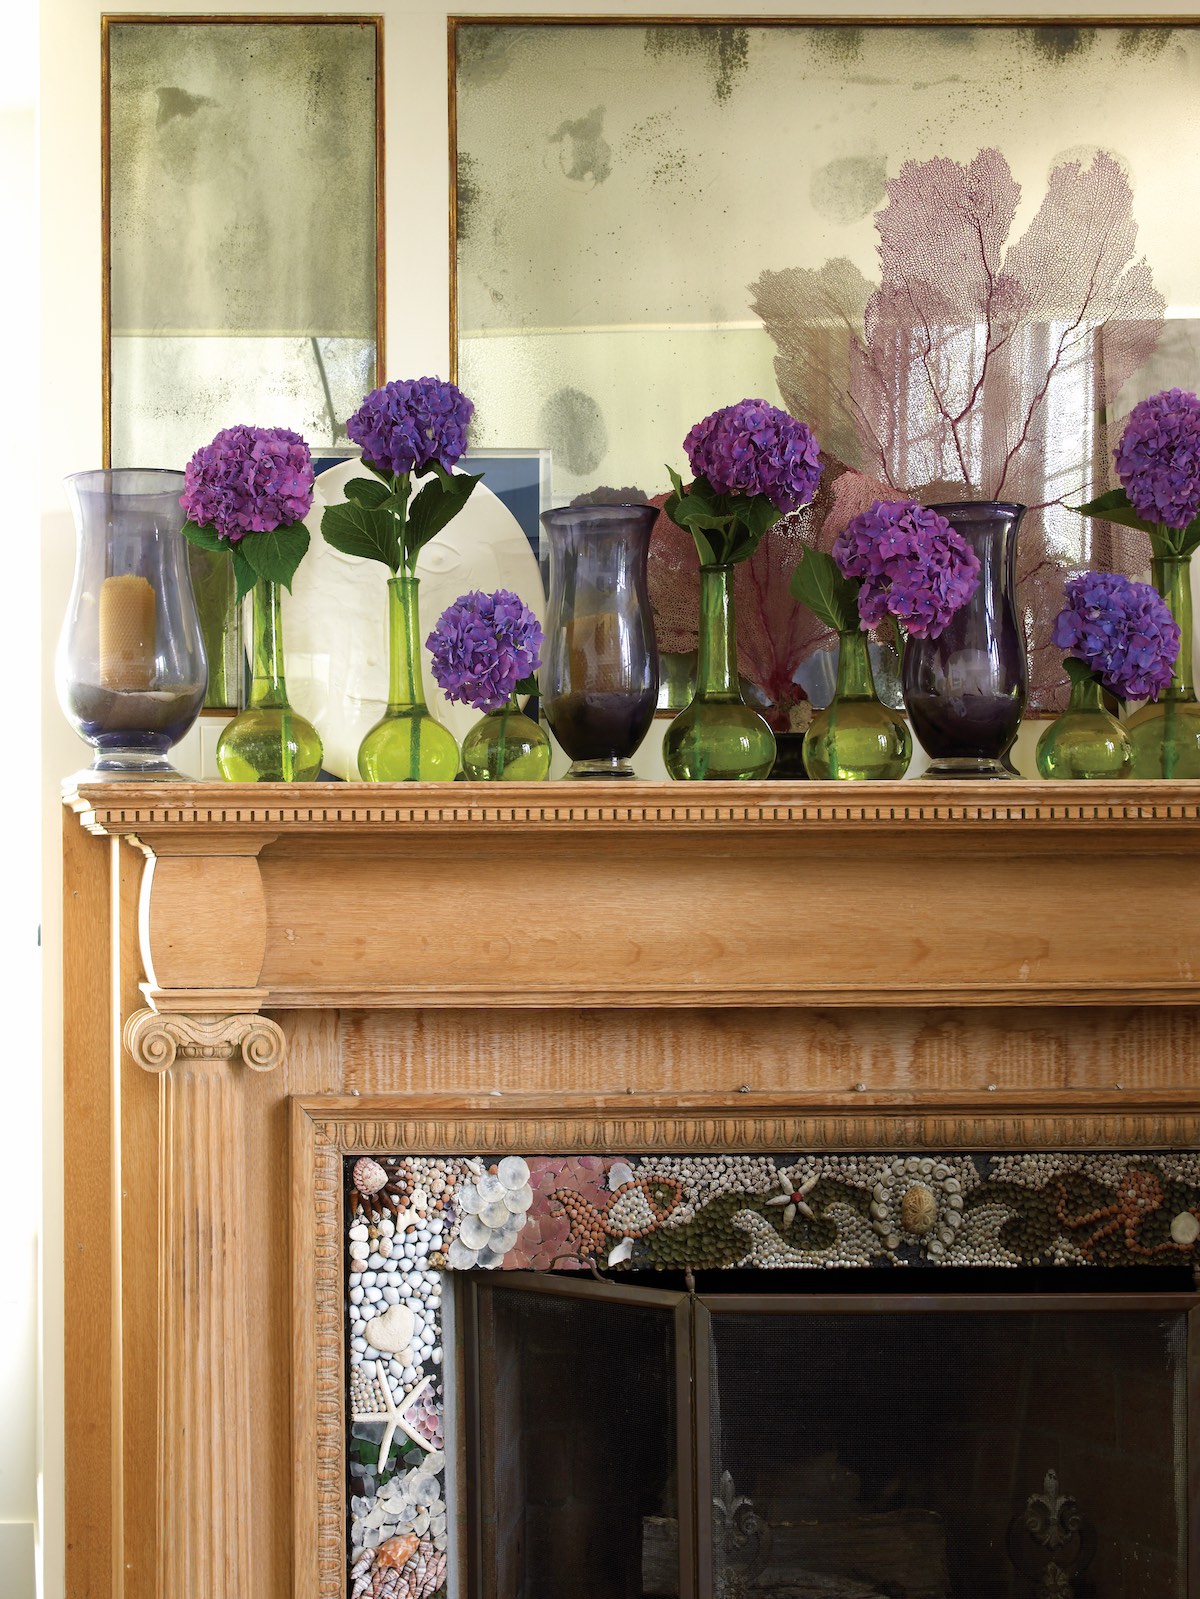 Carved wooden mantle topped with stems of purple hydrangeas in green glass bud vases.